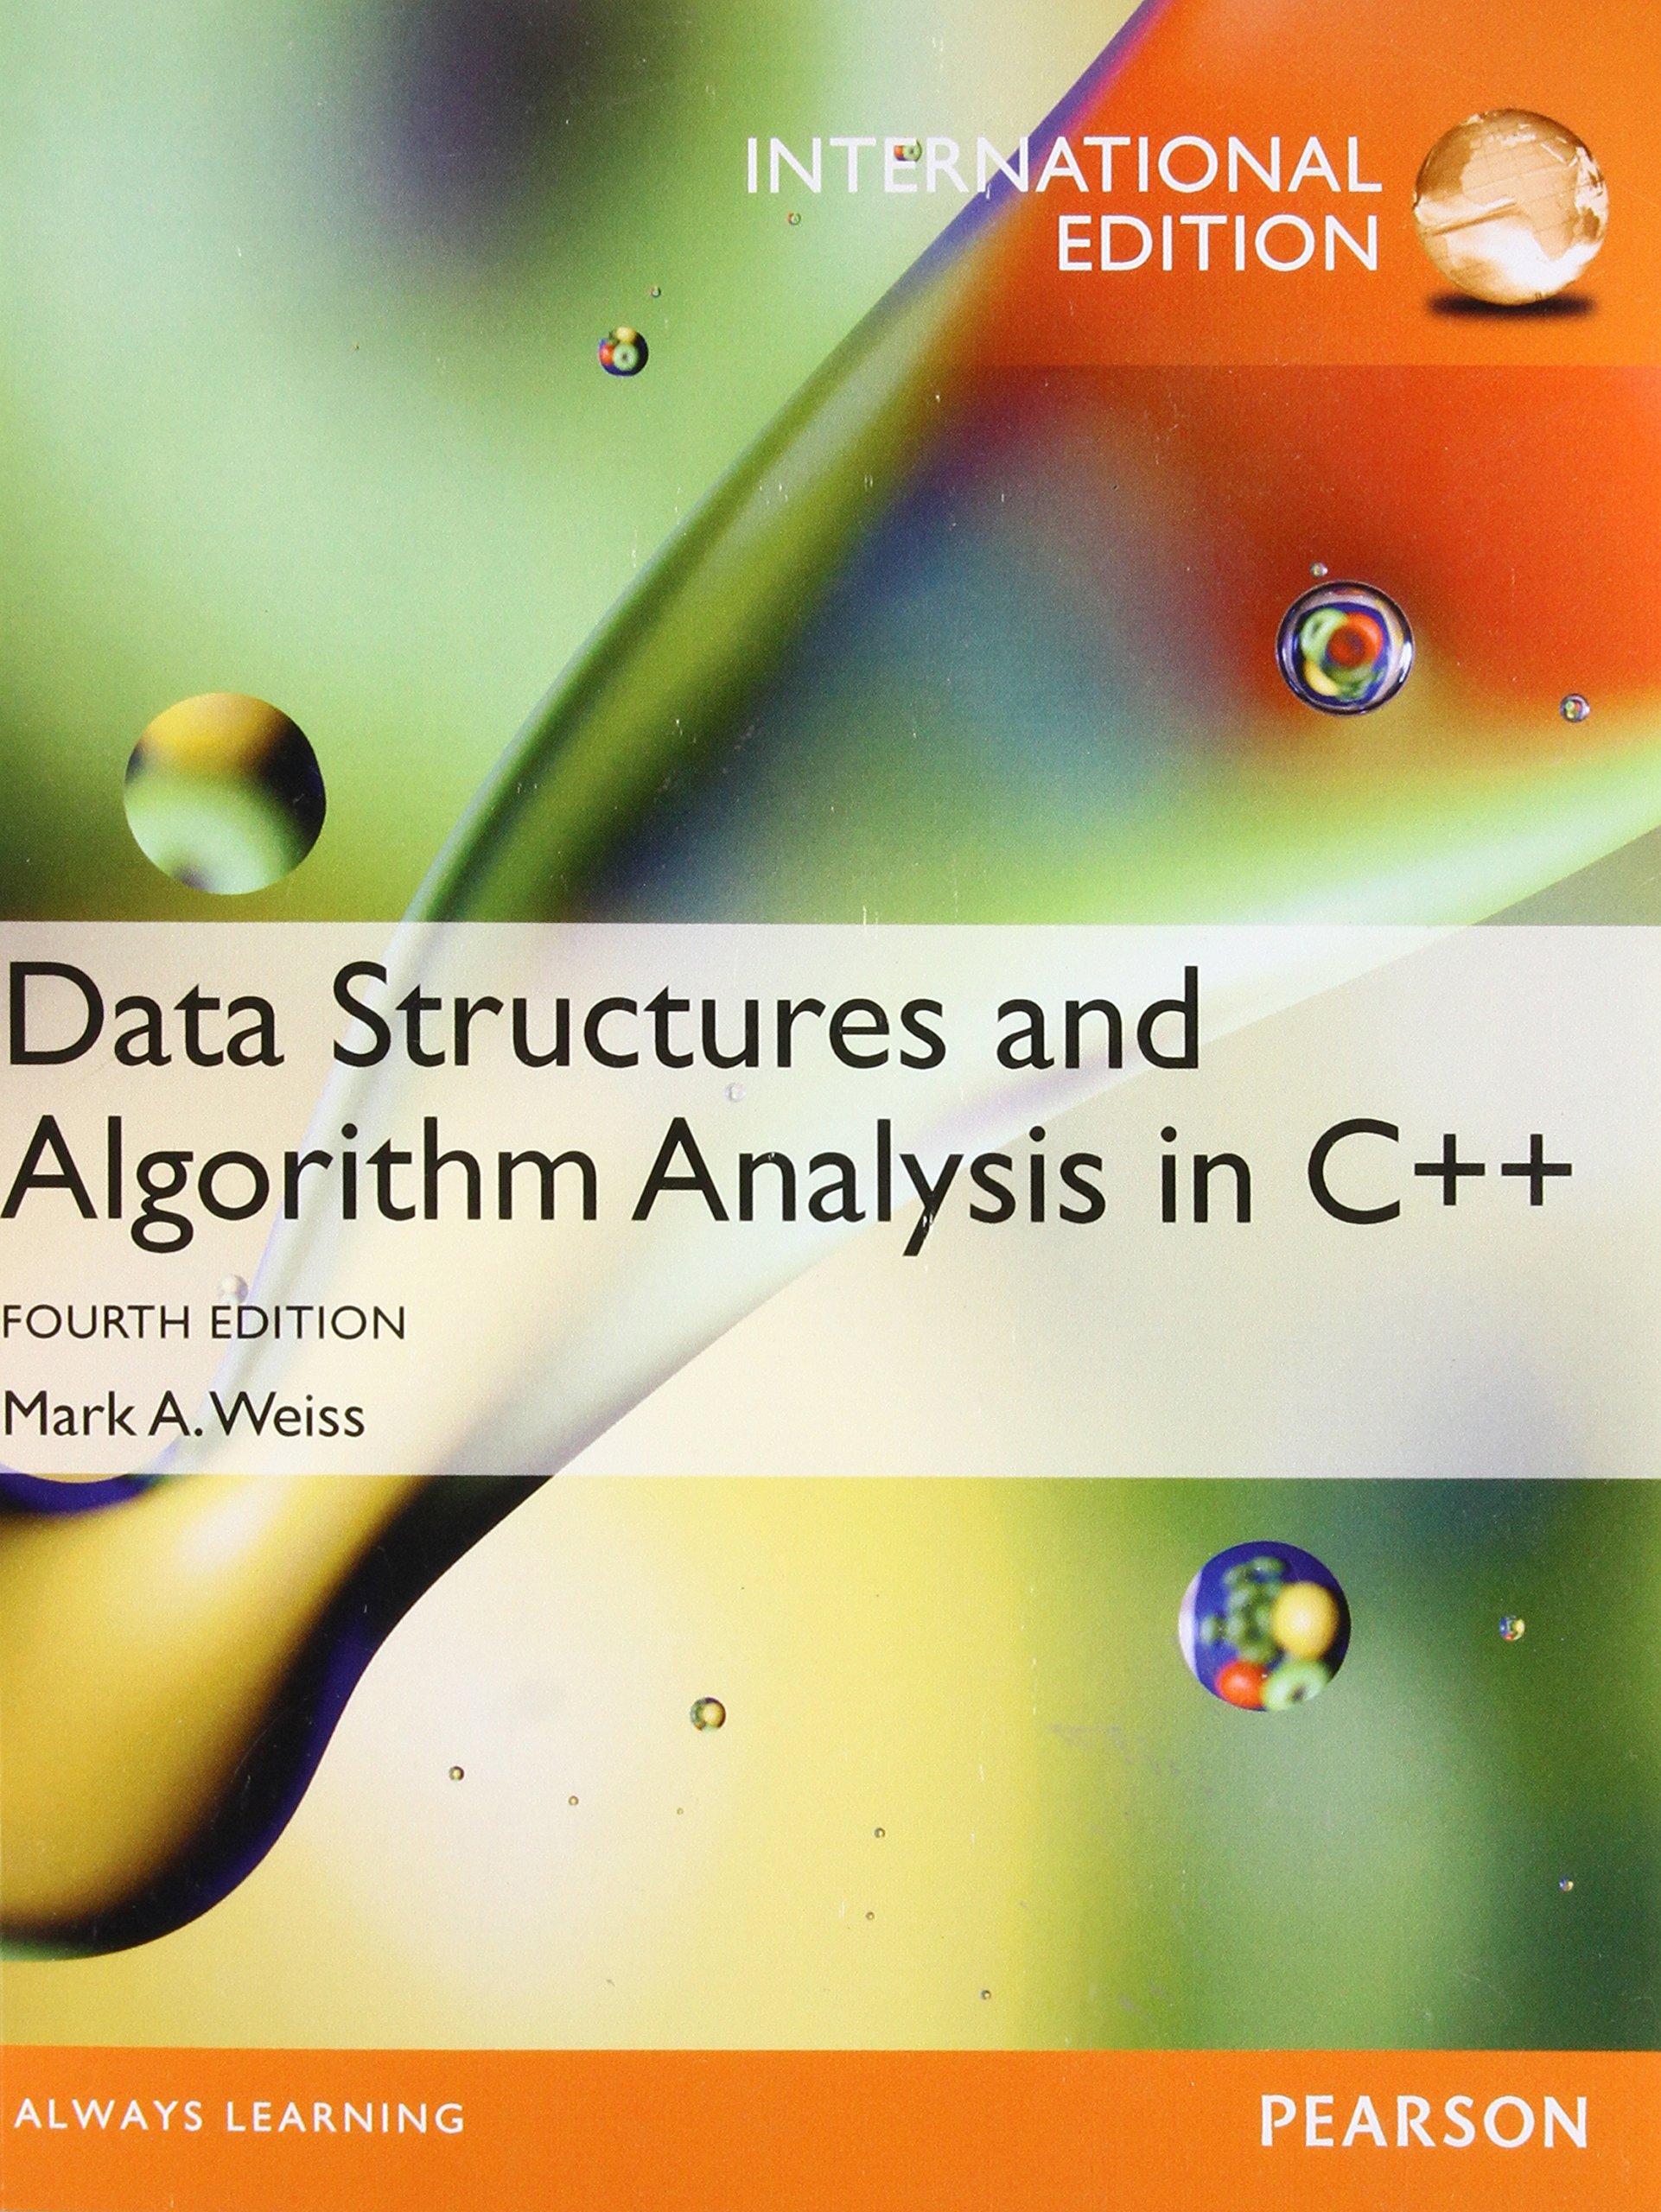 data structures and algorithm analysis in c++ 4th international edition mark a. weiss 0273769383,